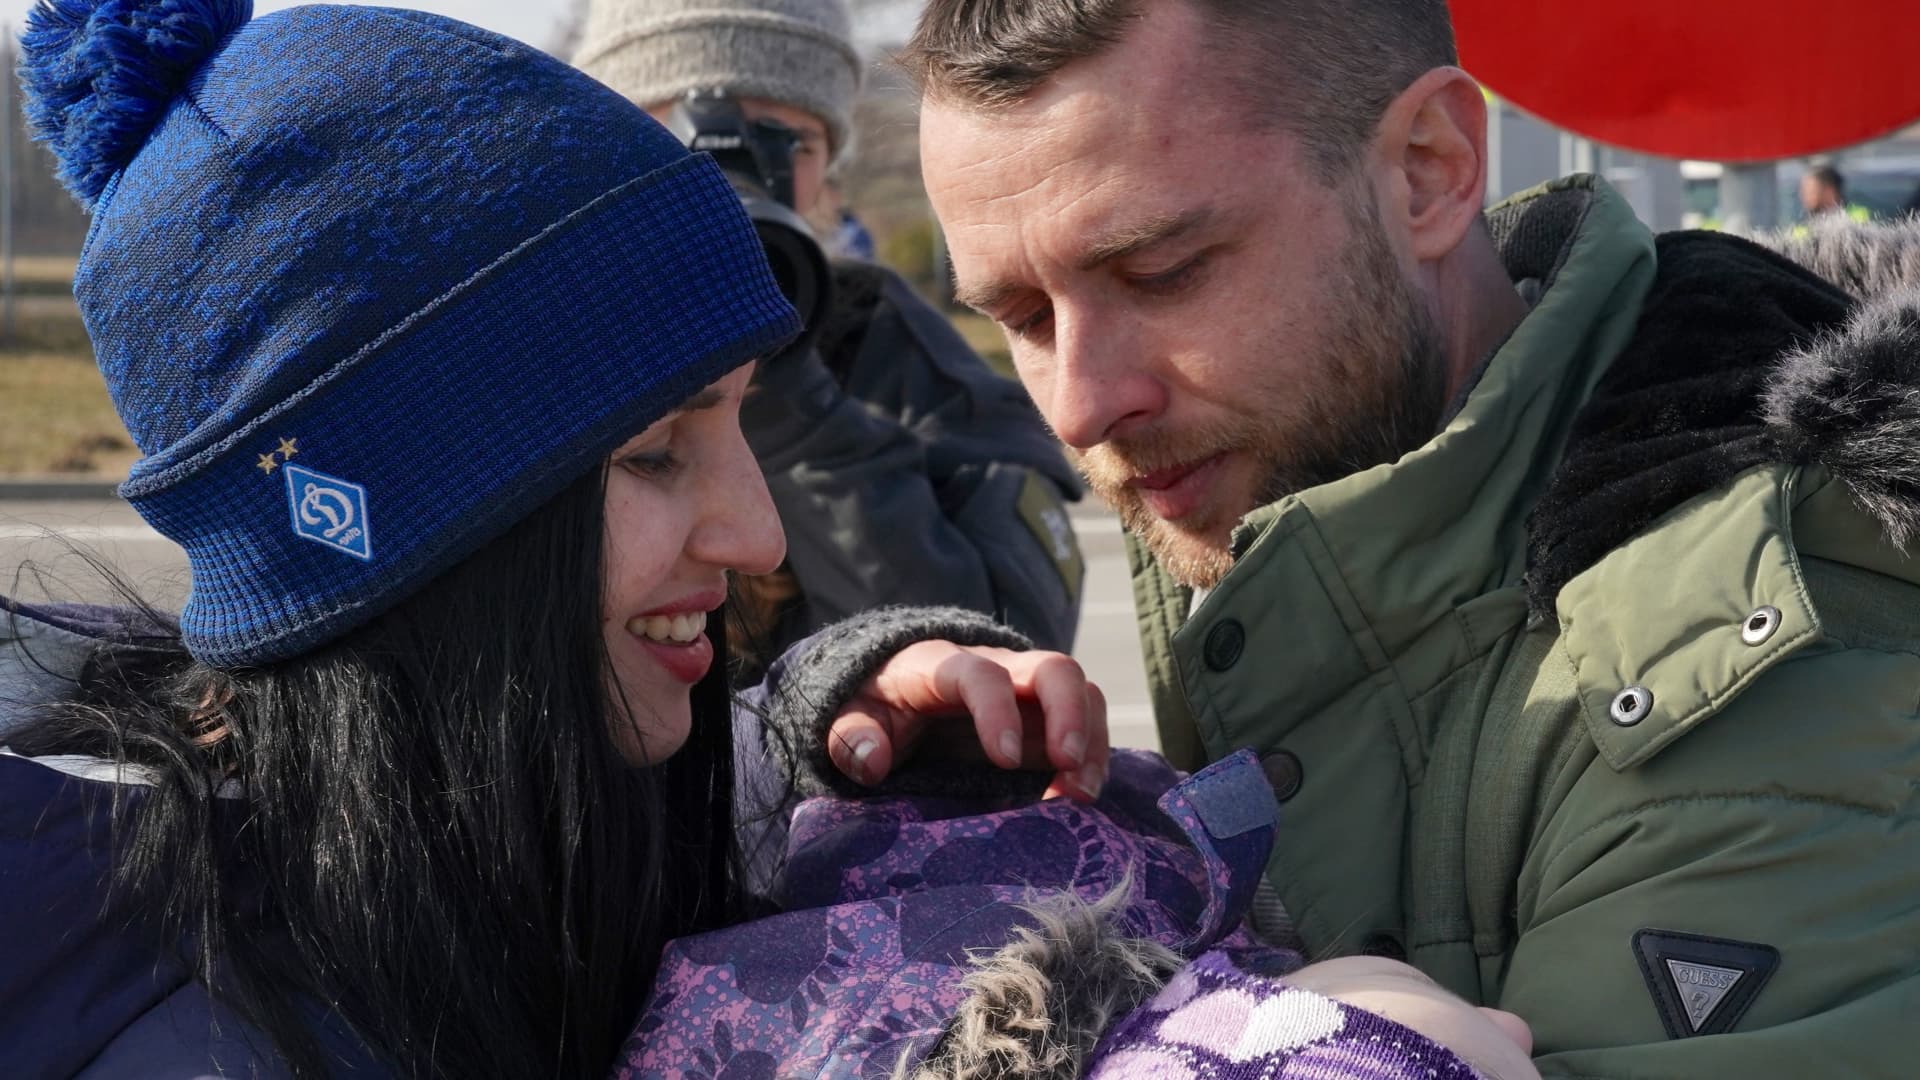 A Ukrainian man with a child welcomes his wife as Ukrainians cross the border from Ukraine to Poland at the Korczowa-Krakovets border crossing on February 26, 2022, following the Russian invasion of Ukraine.